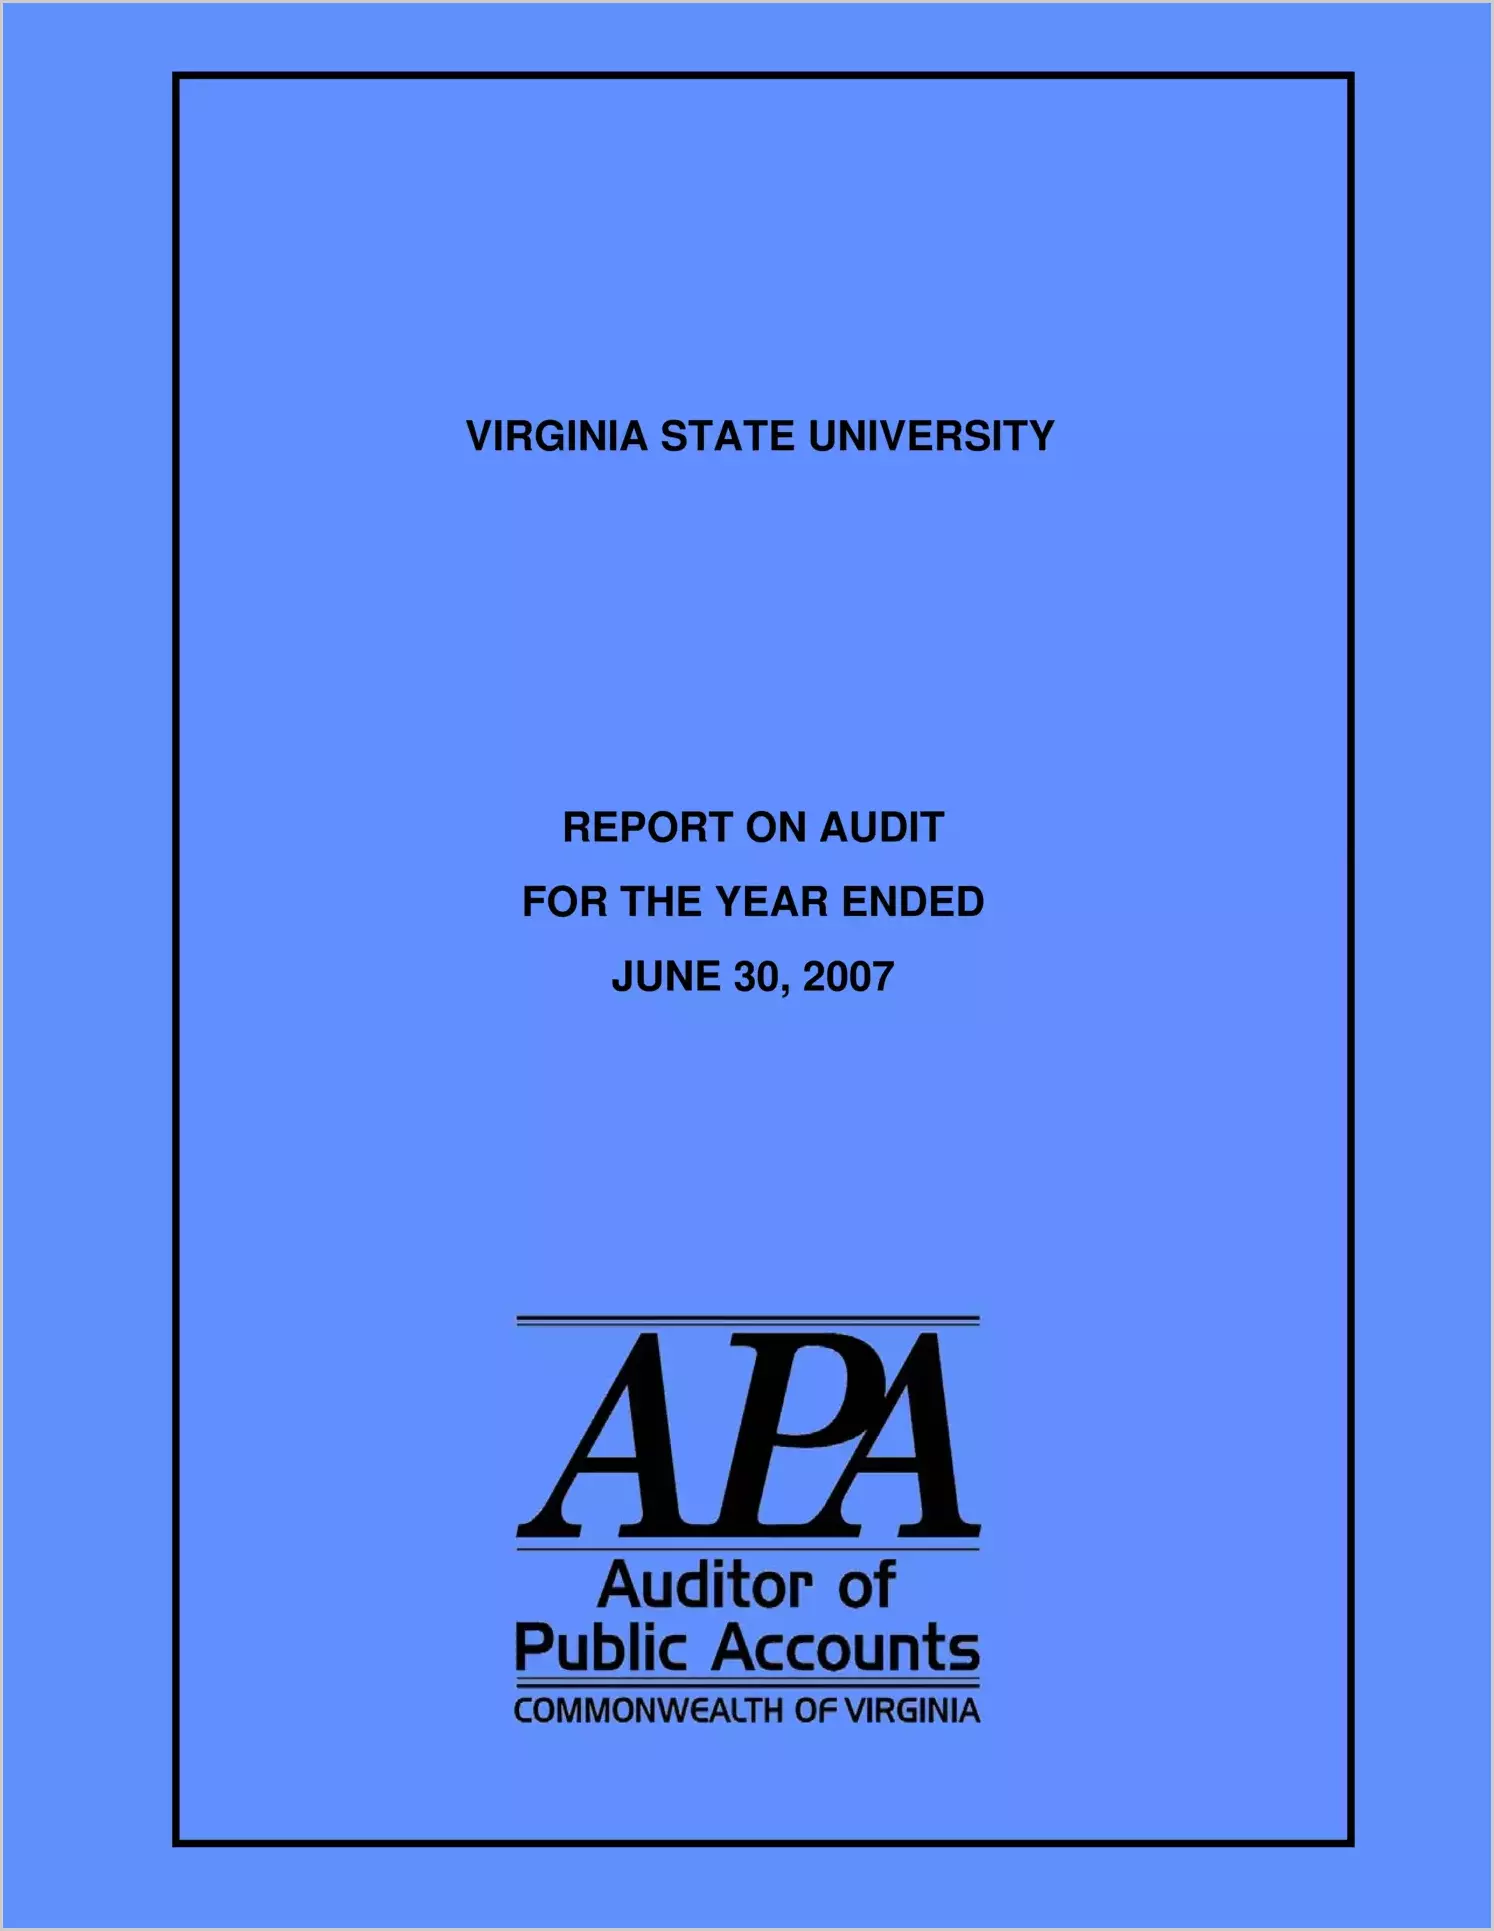 Virginia State University for the year ended June 30, 2007